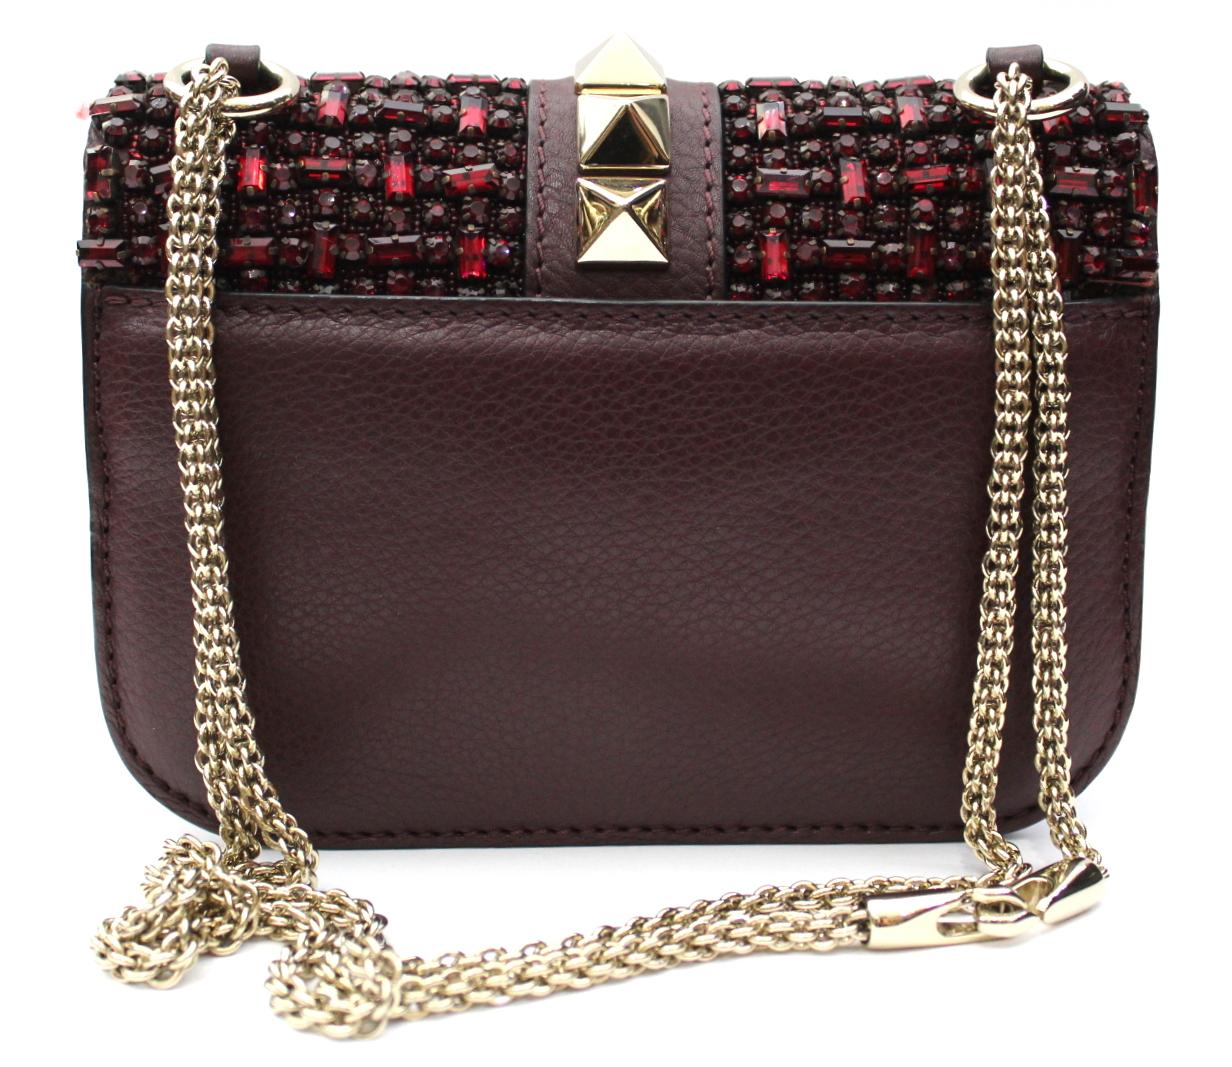 Sensational Valentino bag shoulder bag embellished with numerous rhinestones. The color of the bag is burgundy while the chains and studs are light gold. Internally it is lined with a soft skin. The conditions of the bag are like new.